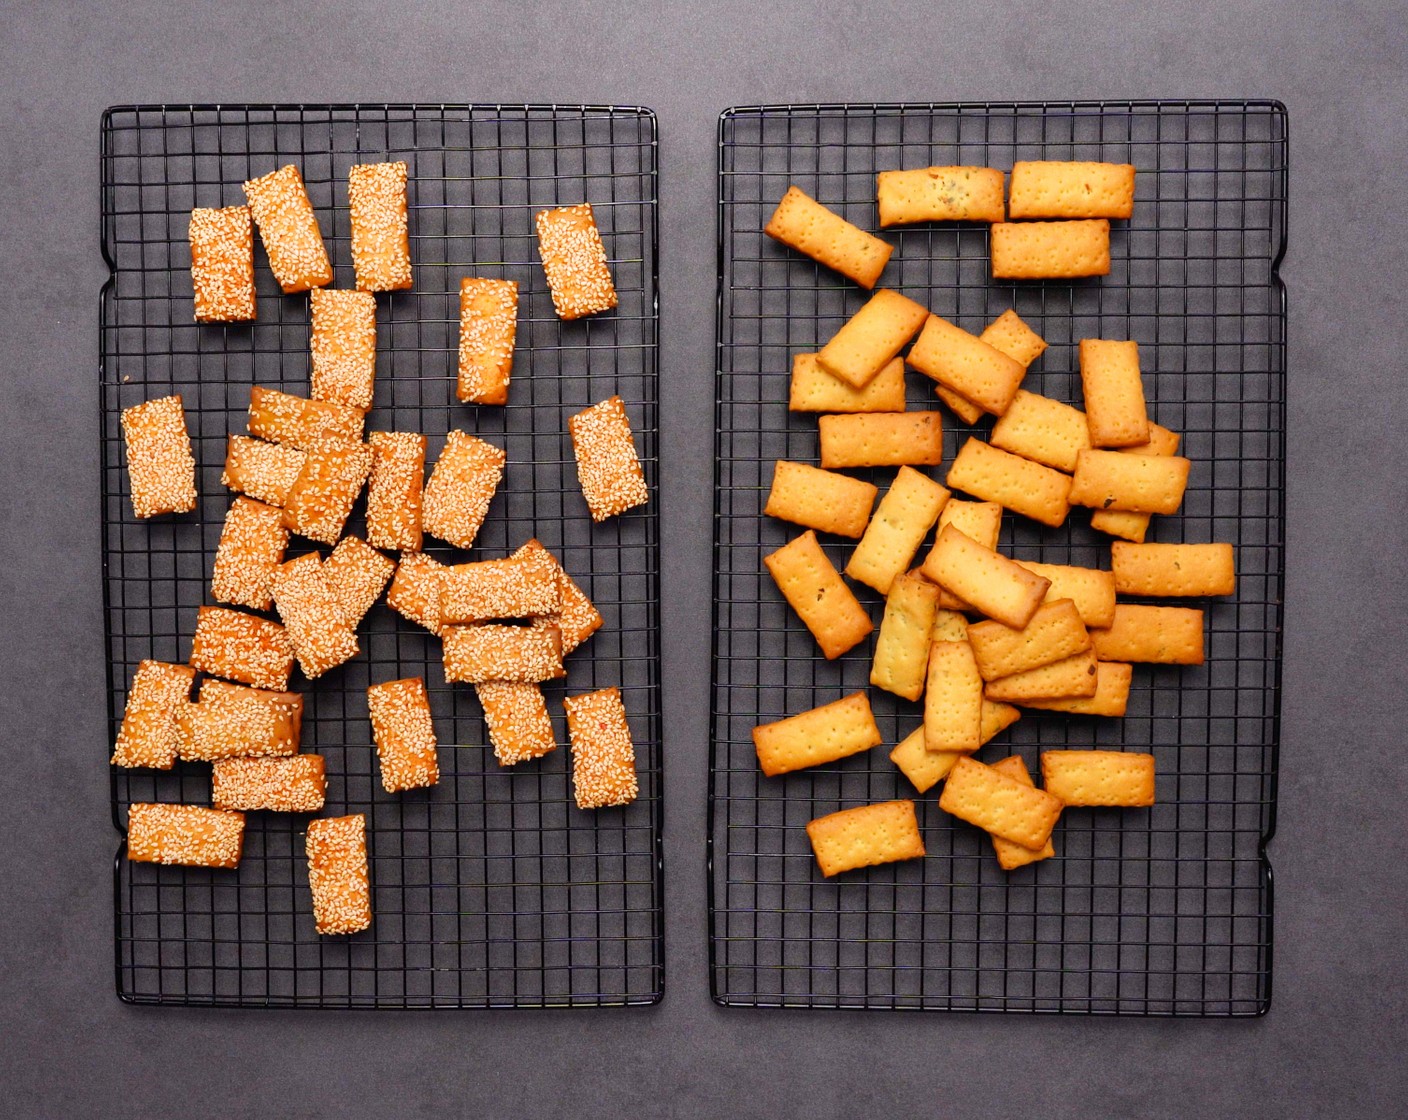 Spicy-Sesame and Garlic-Thyme Crackers